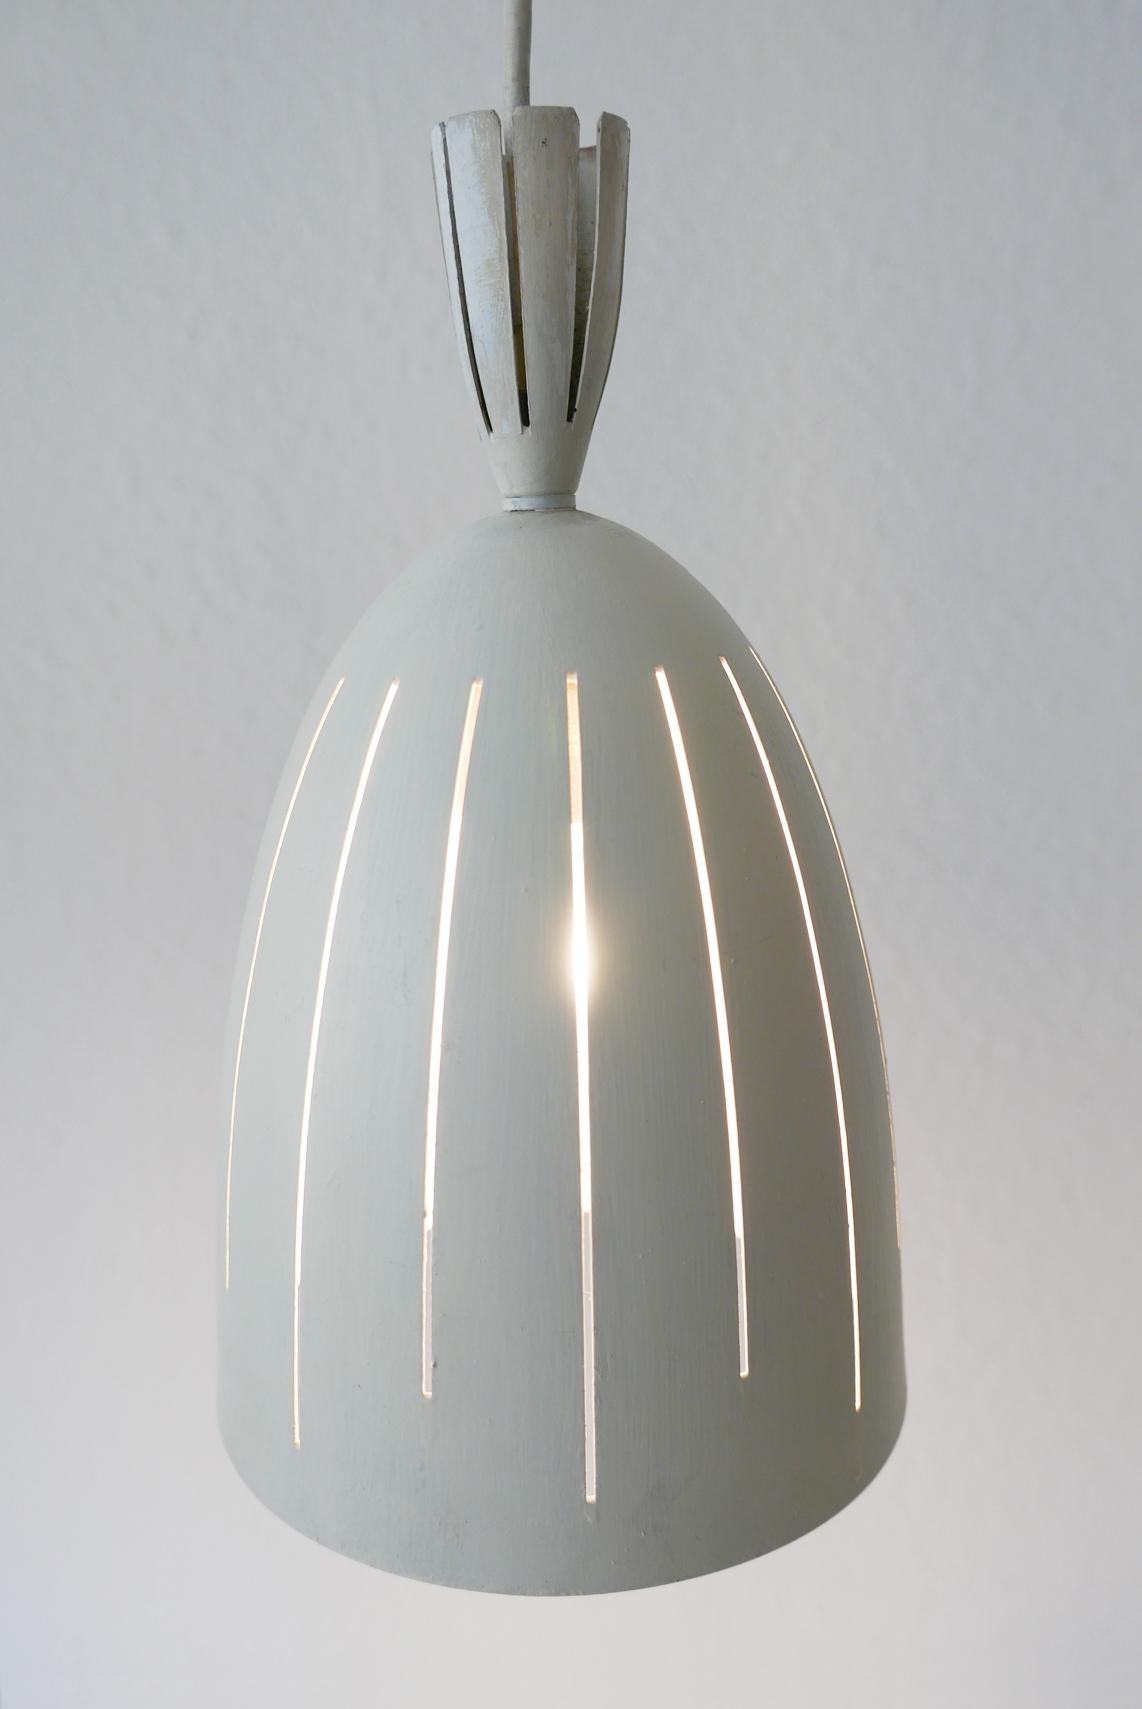 Set of Three Lovely Mid-Century Modern Diabolo Pendant Lamps, 1950s, Germany For Sale 3